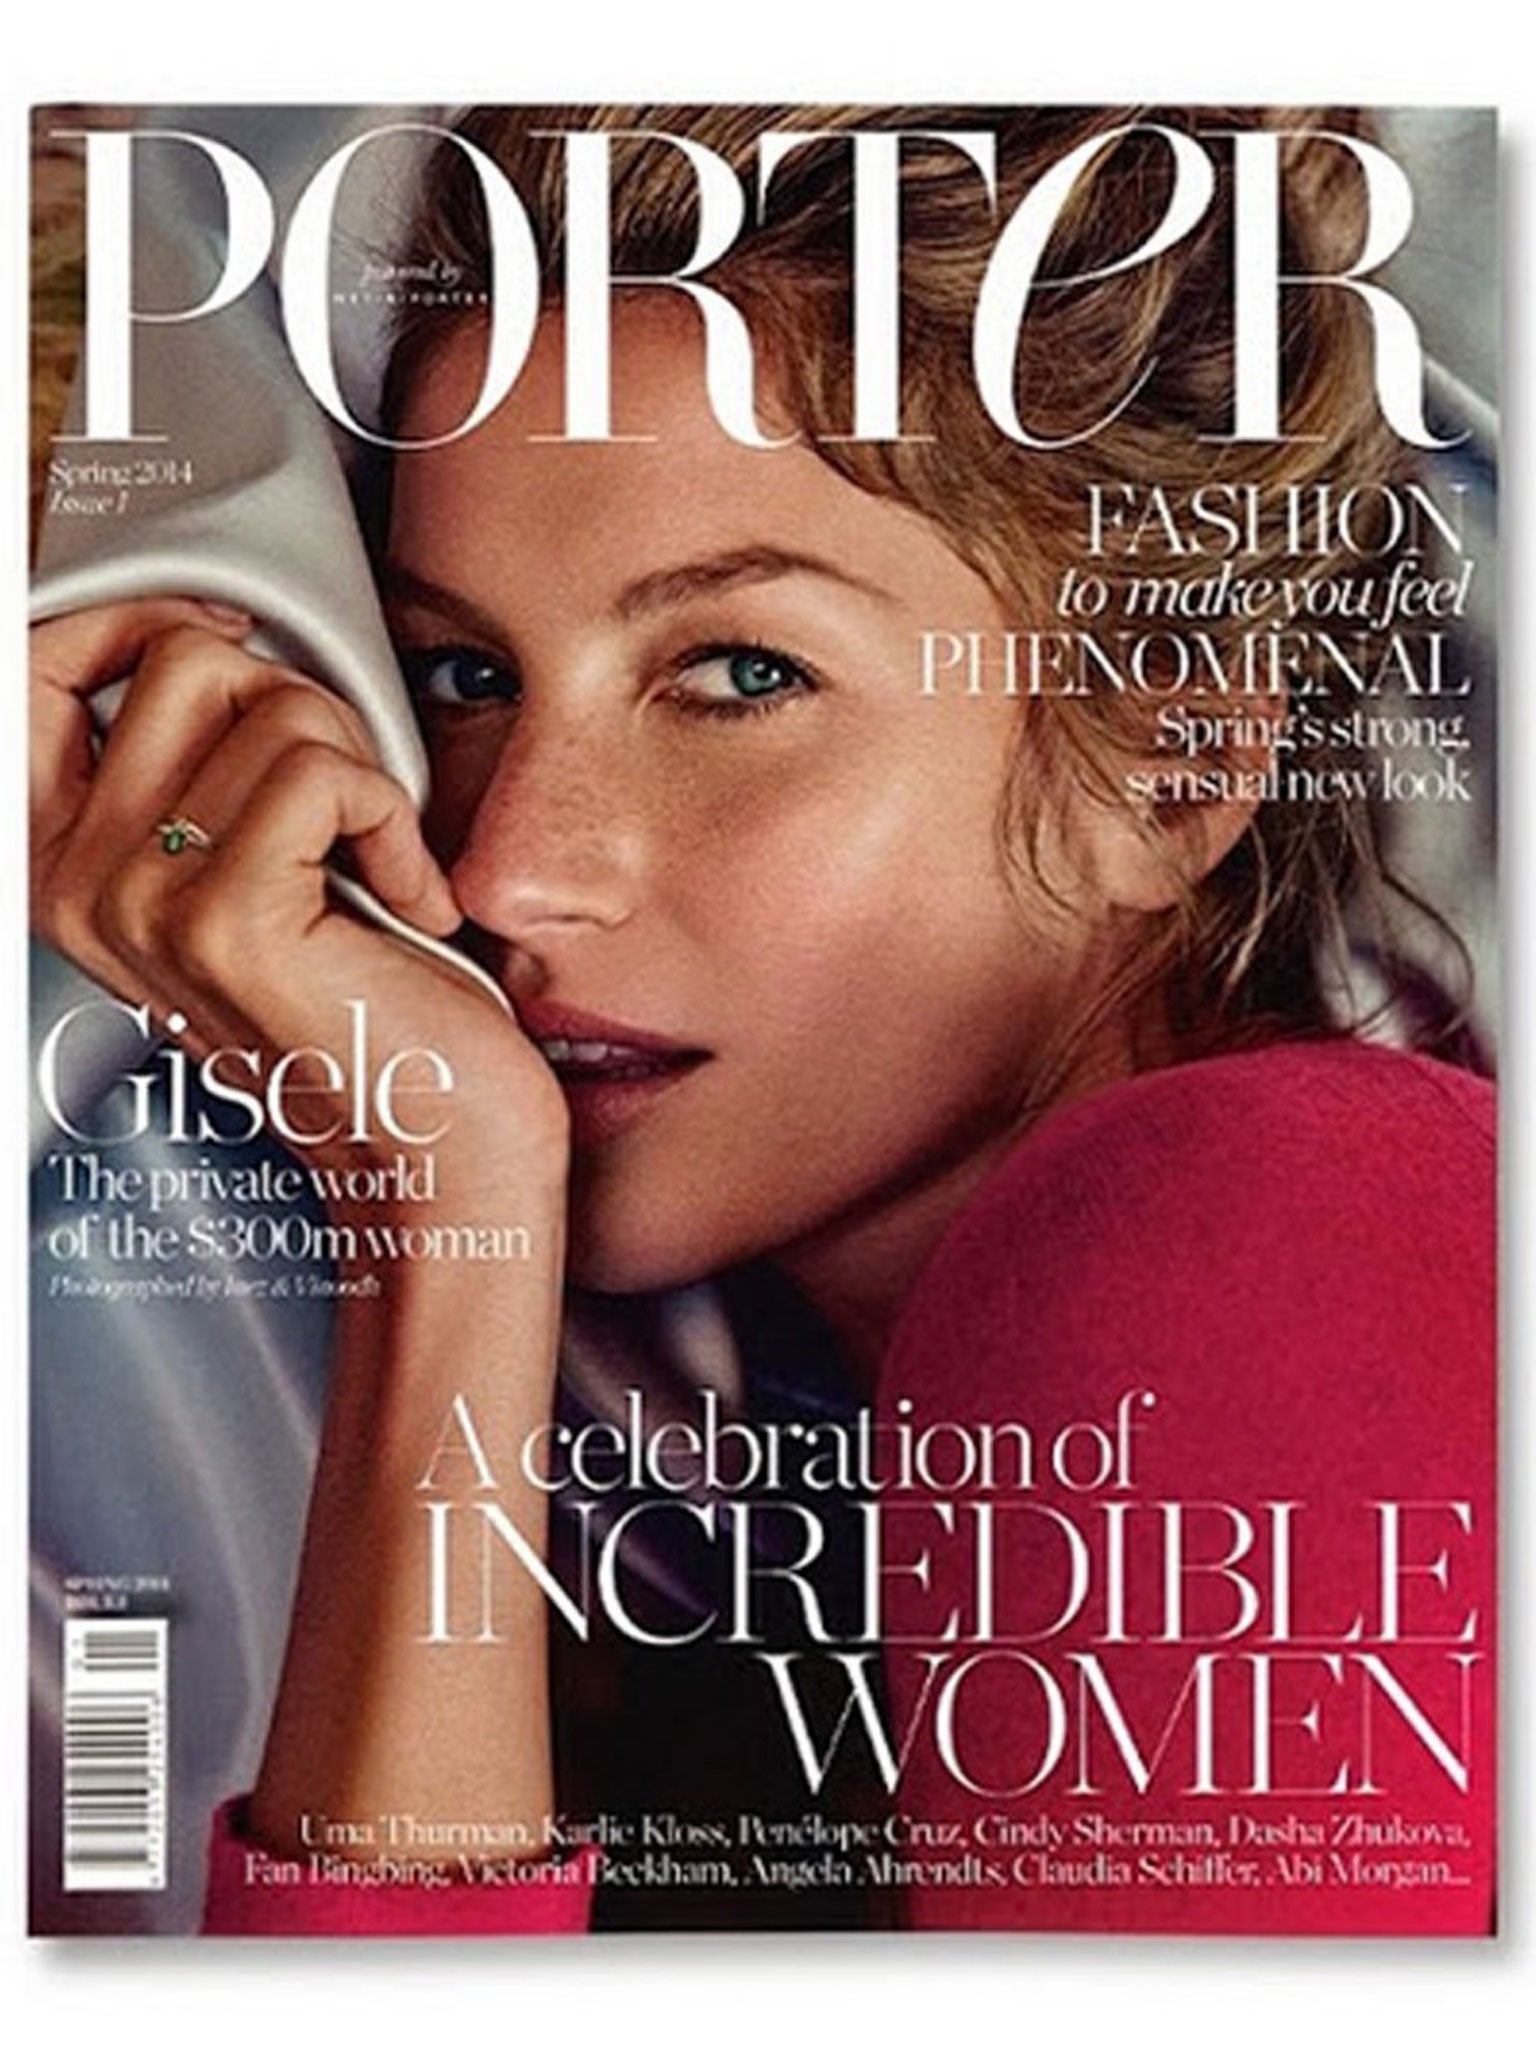 The first edition of the new magazine 'Porter'